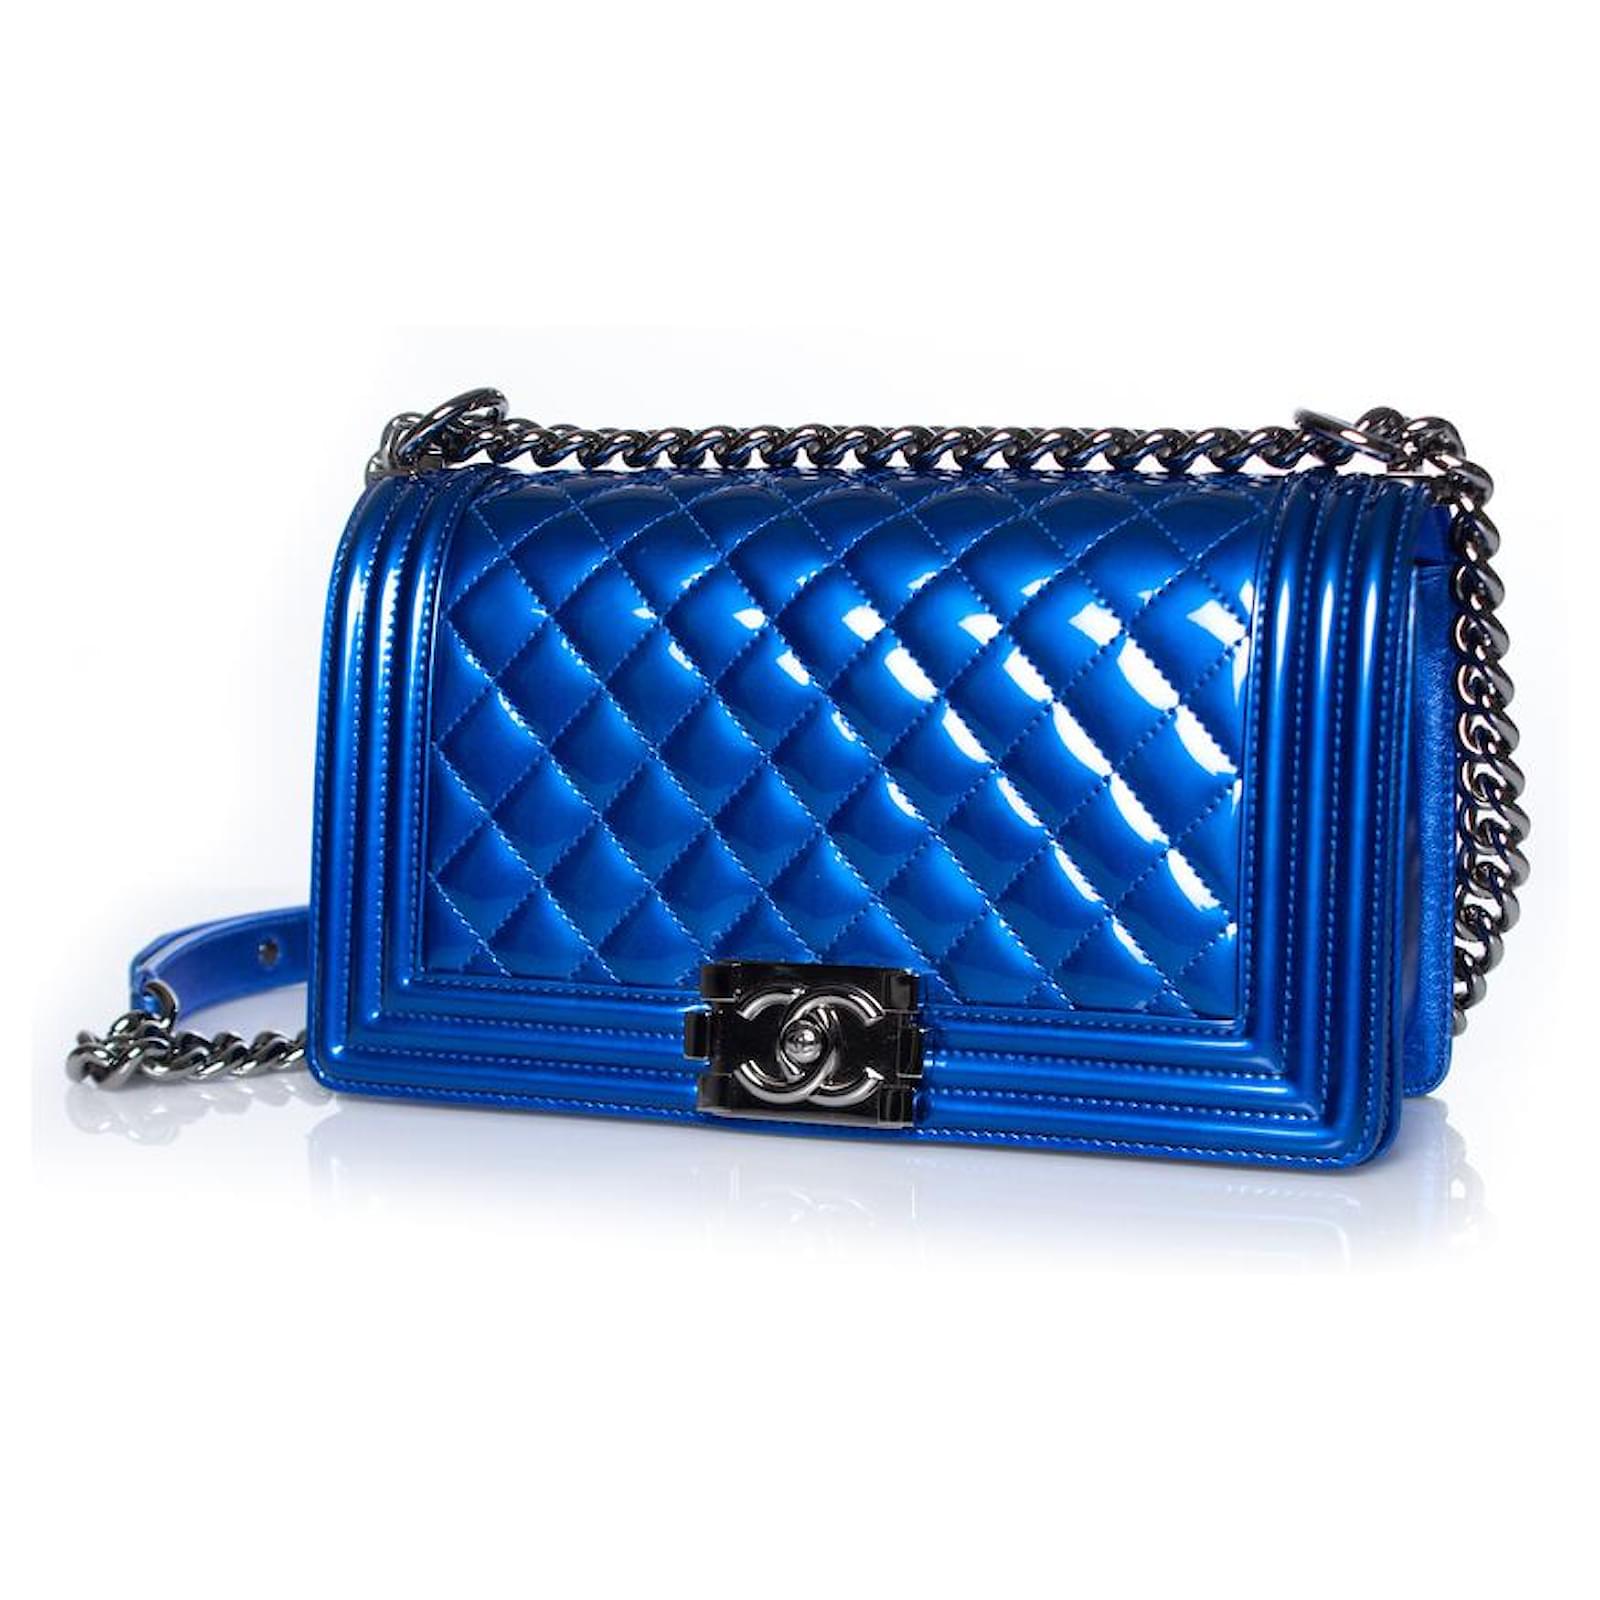 Chanel, boy bag in metallic blue Leather Patent leather ref